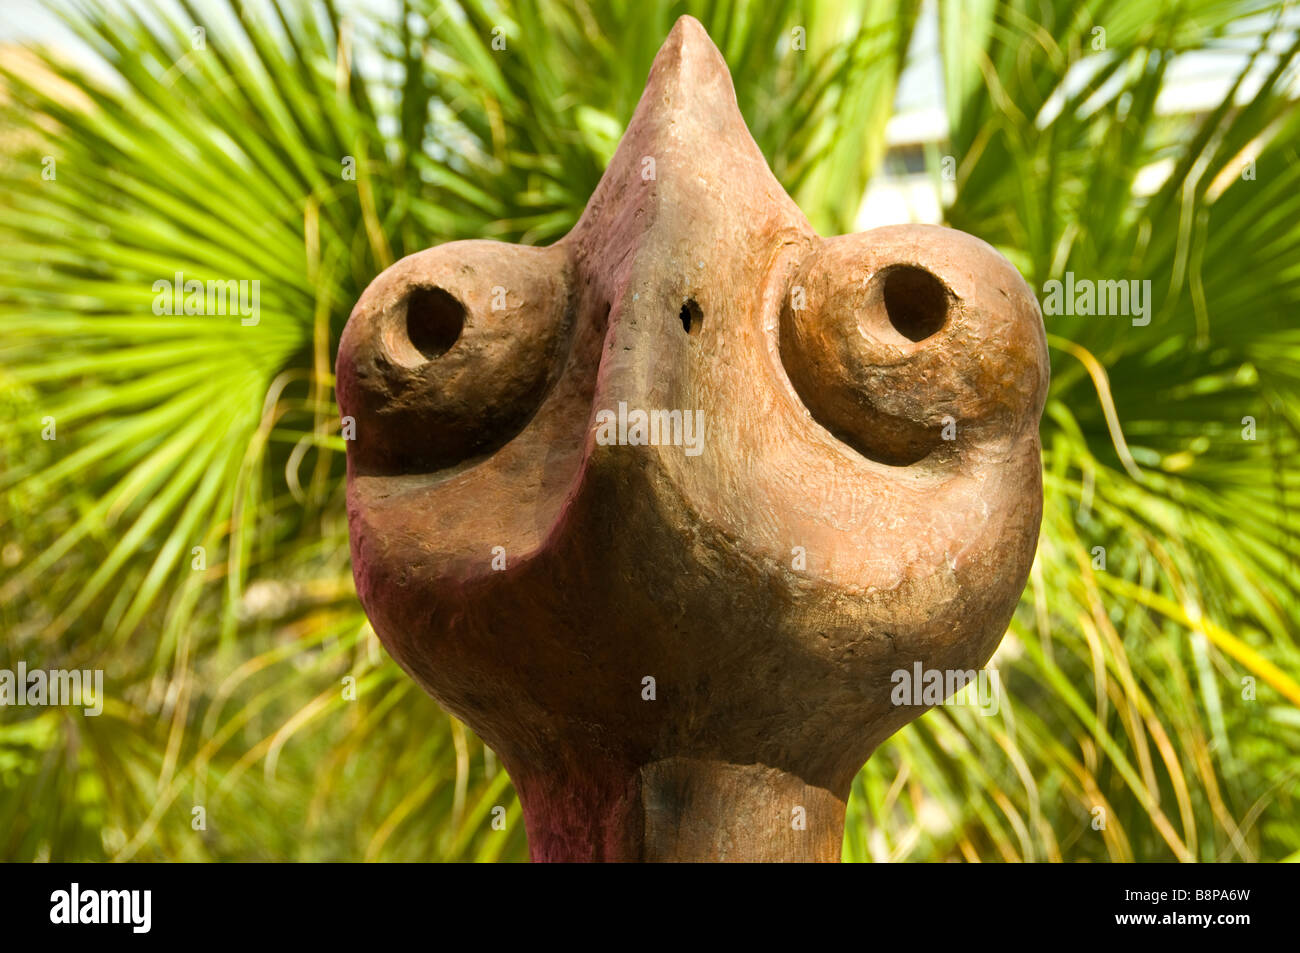 San Antonio Art Museum outdoor sculpture of an animal head with palm fronds behind Texas tx tourist attraction Stock Photo